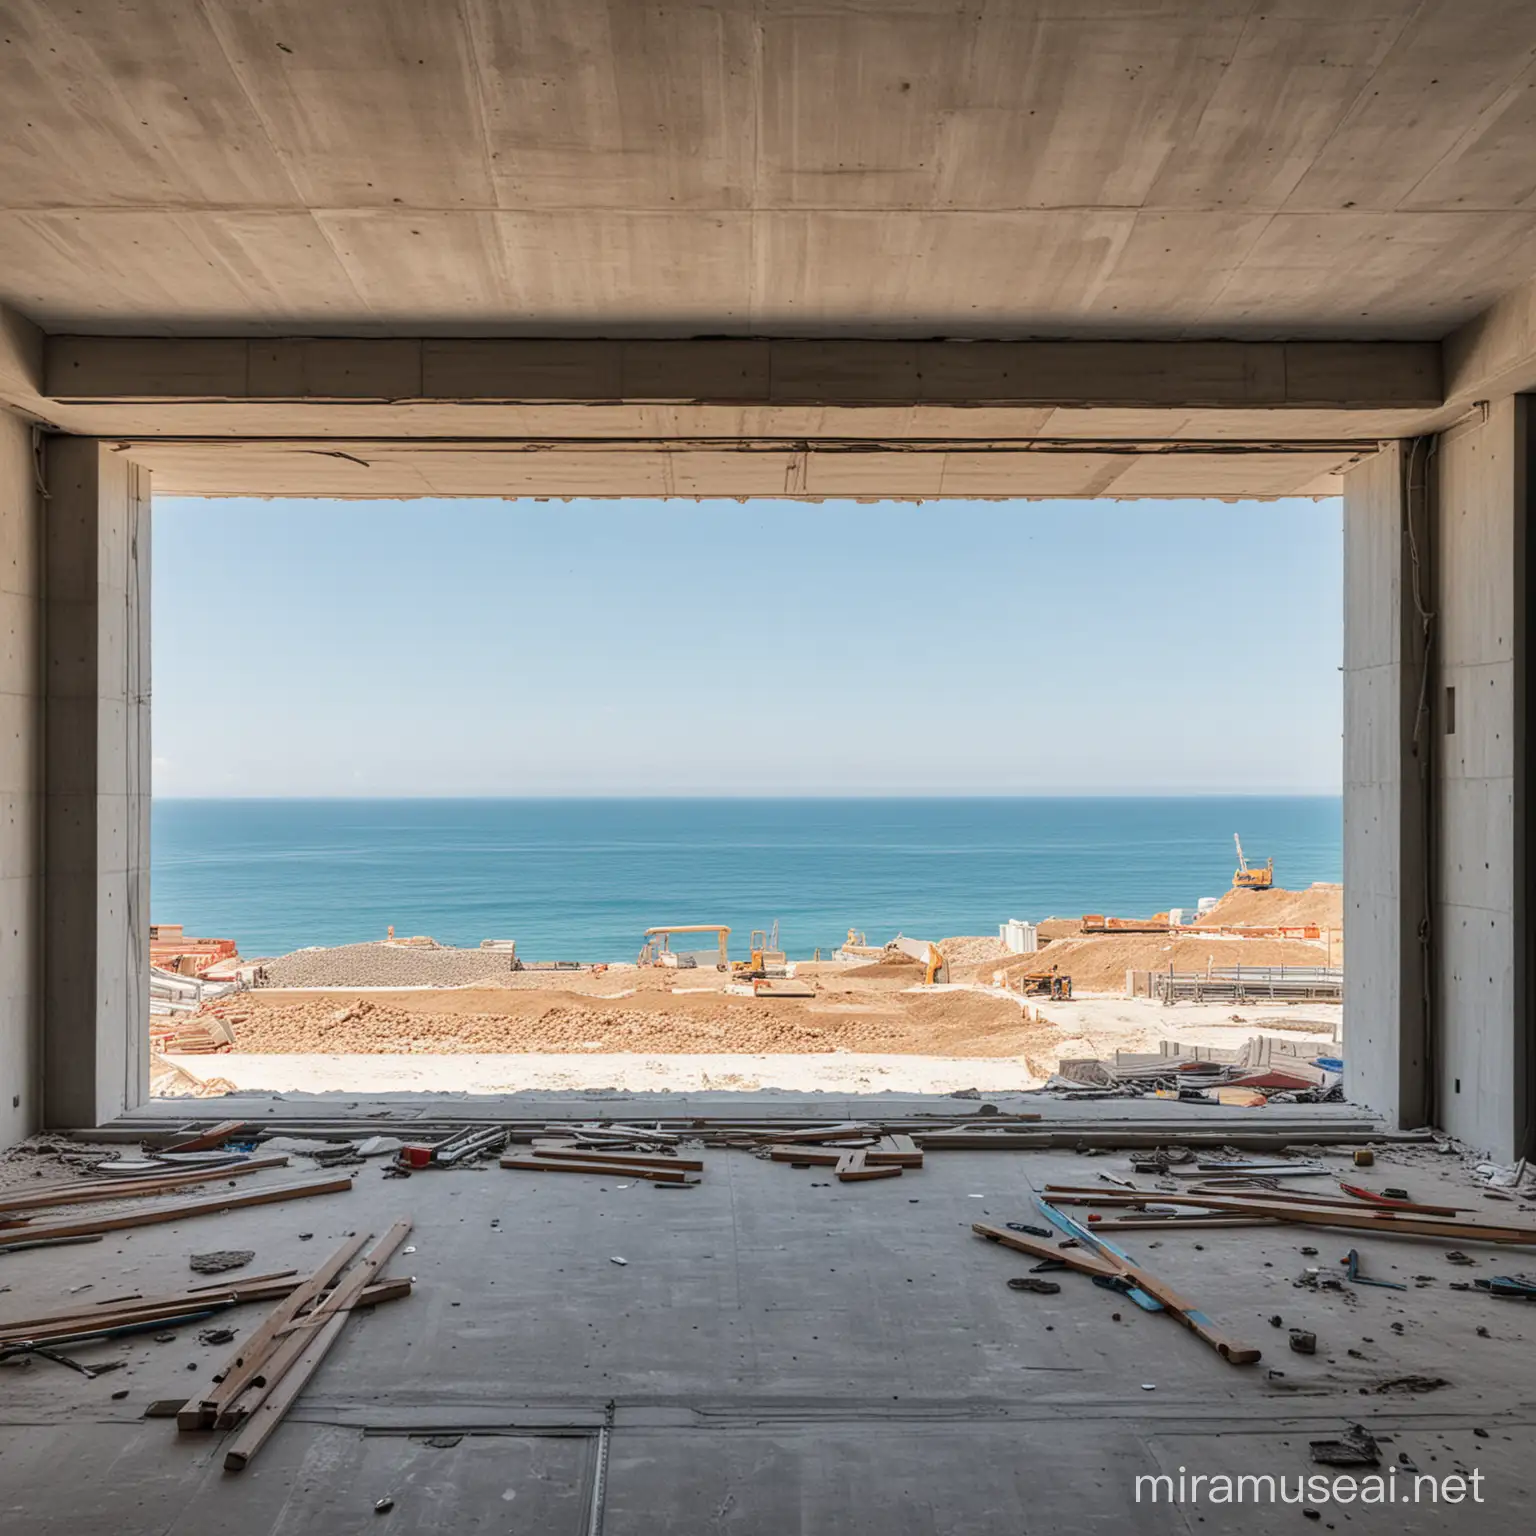 Modern Villa Construction Site by the Sea Interior View in Broad Daylight